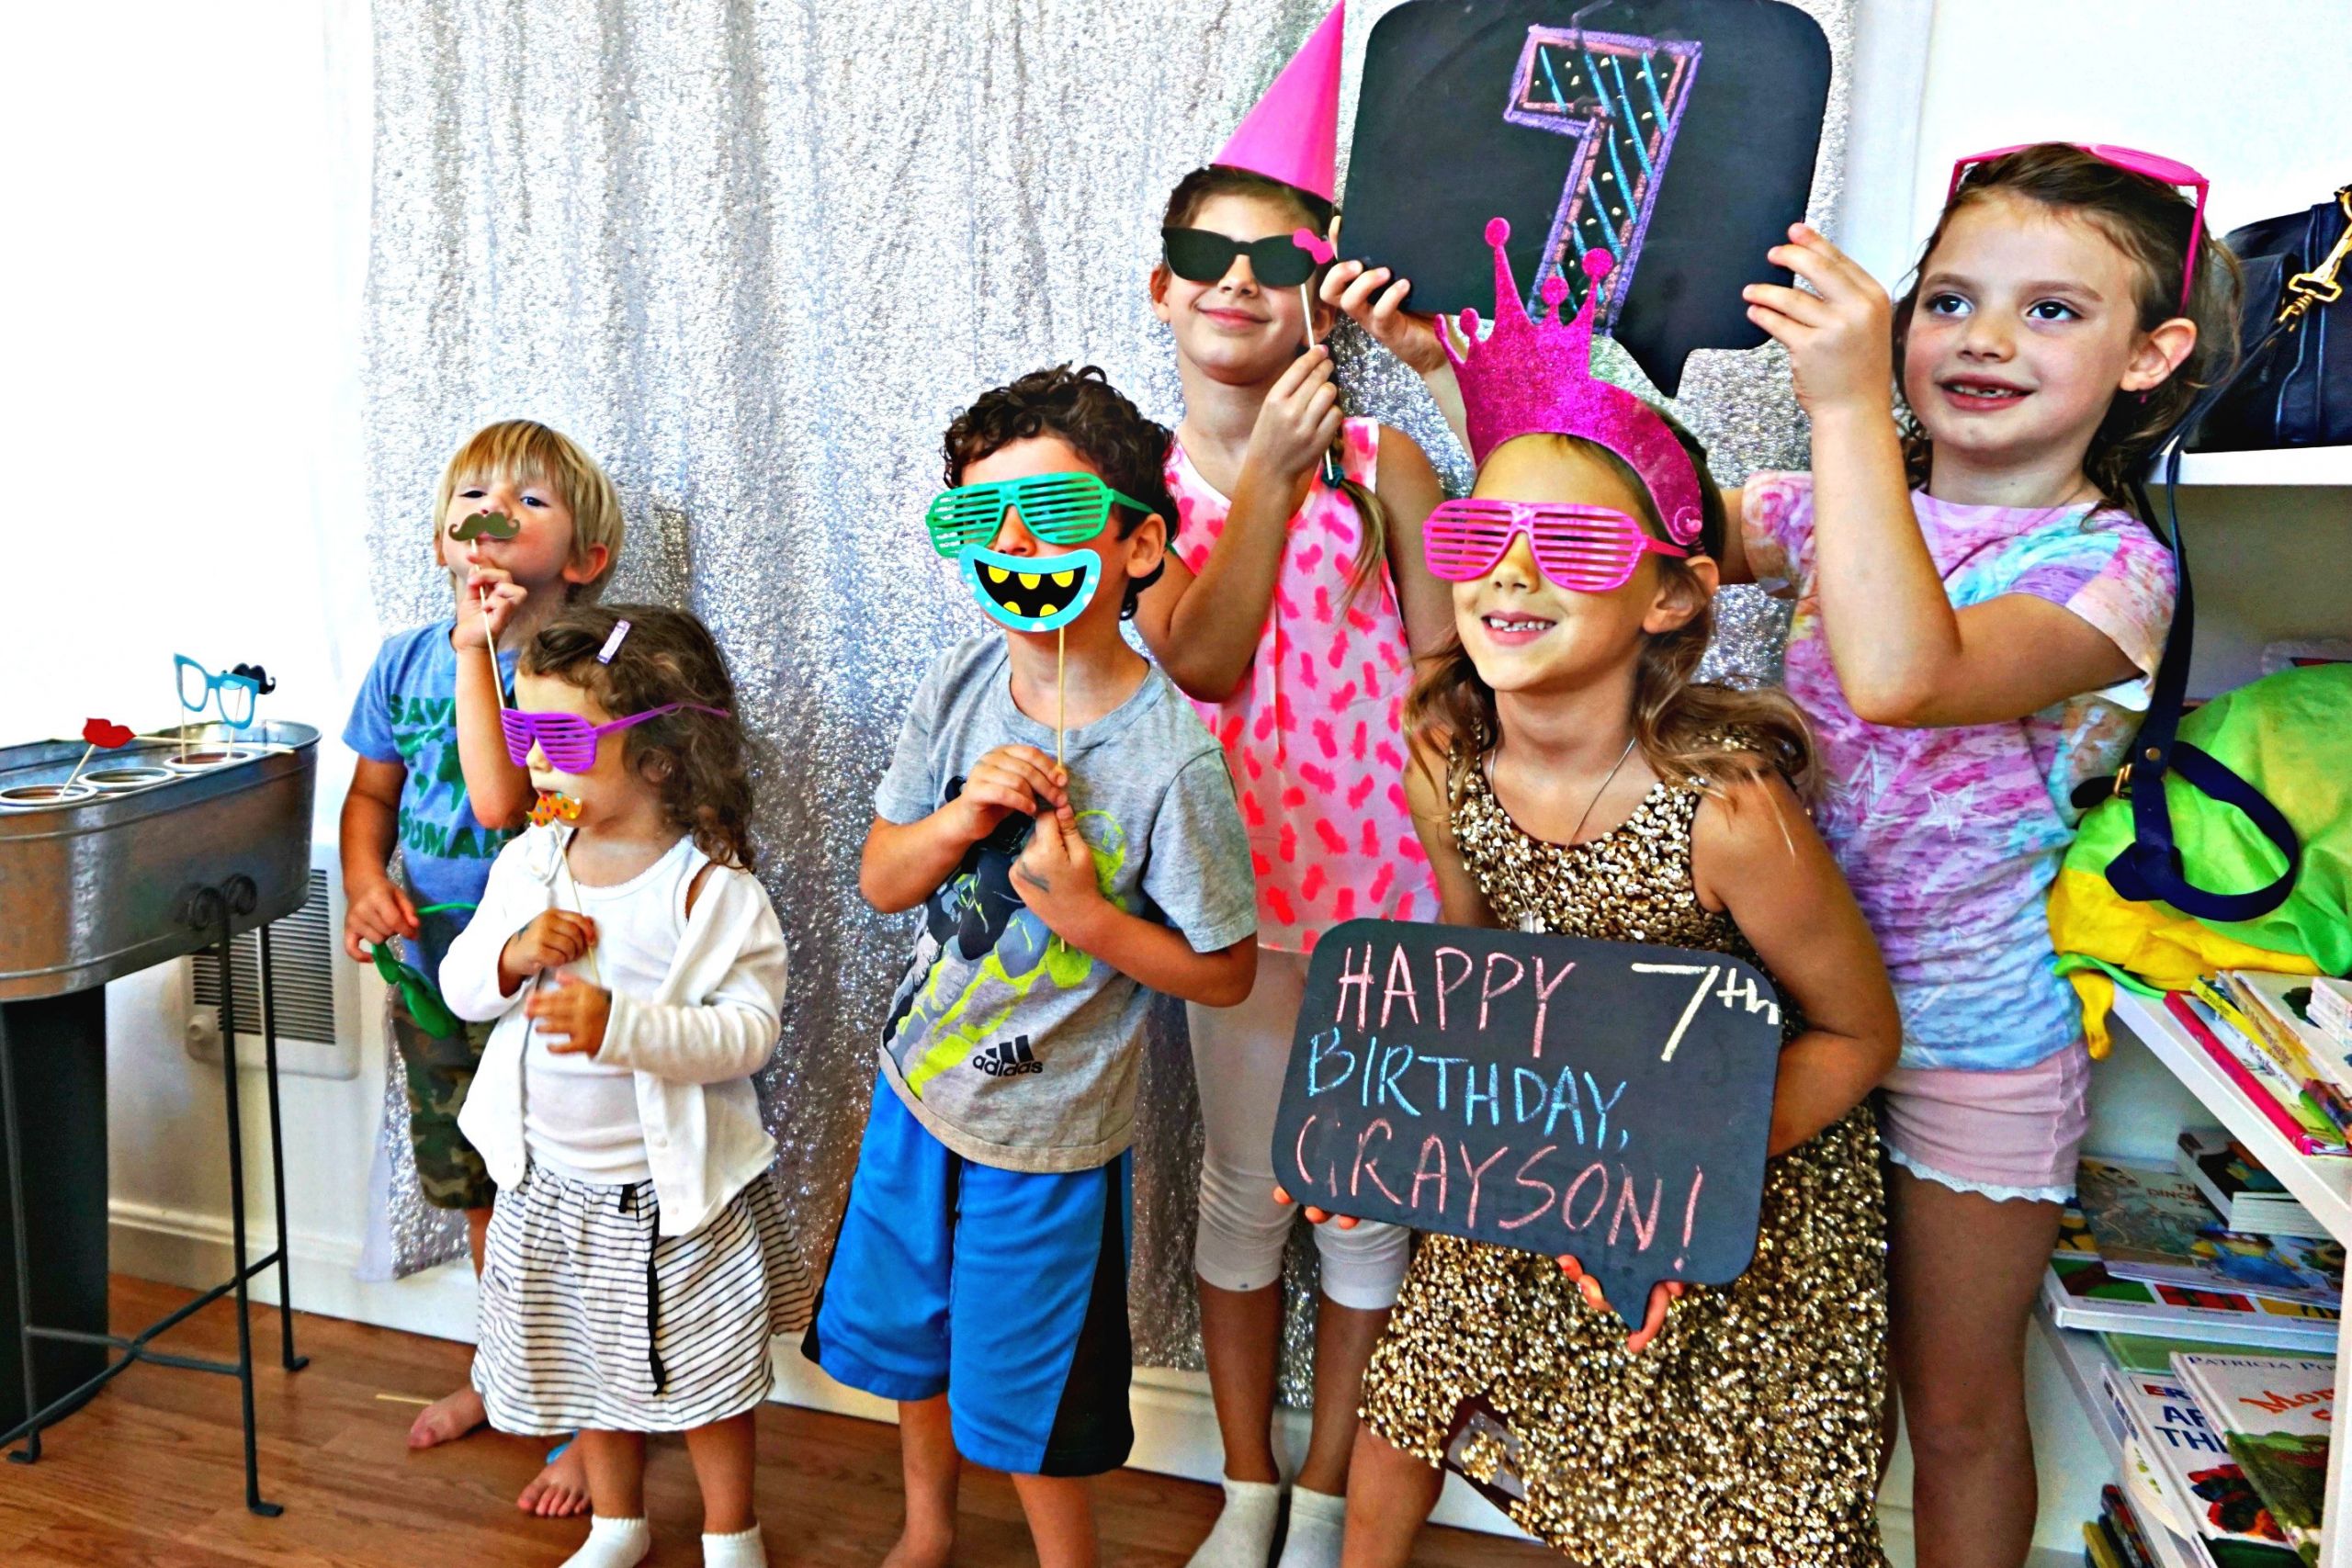 Kids Birthday Party Places Boston
 8 Great Indoor Places to Have a Kid’s Birthday Party in or